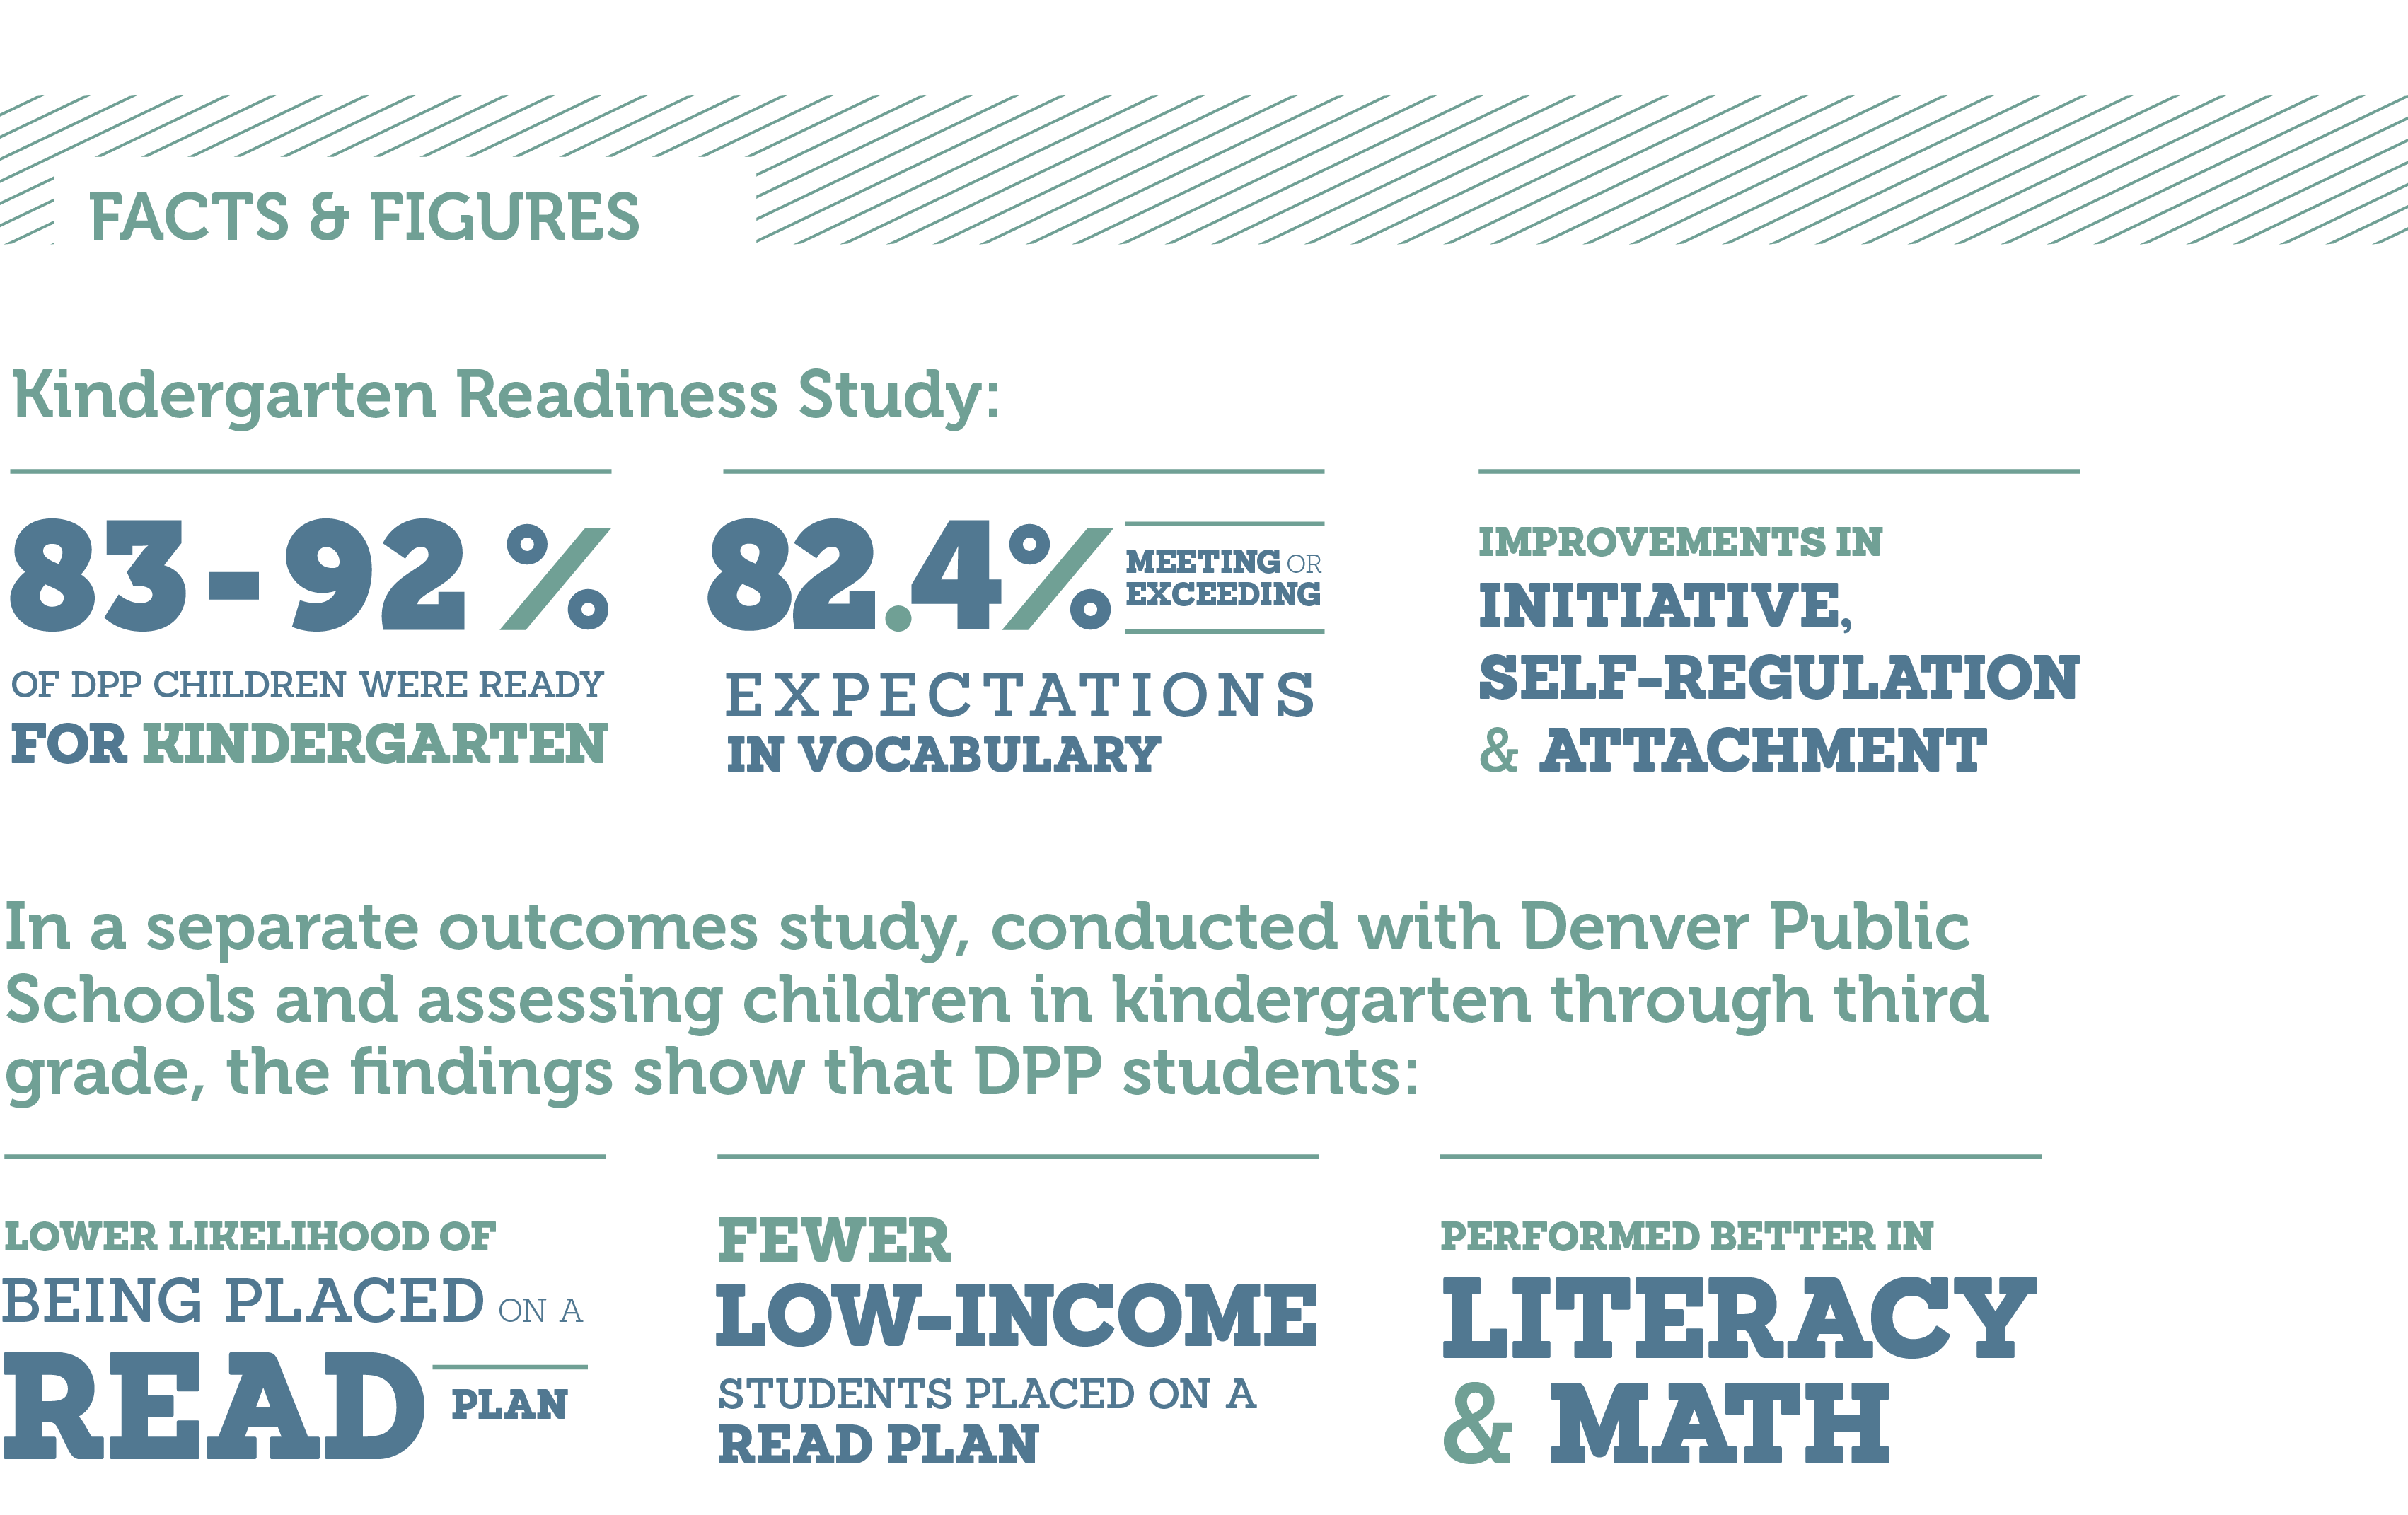 Facts & Figures from Denver Preschool Program’s Kindergarten Readiness Study indicate that DPP students are more ready for kindergarten, exceeded expectations in vocabulary and showed improvements in self-regulation.